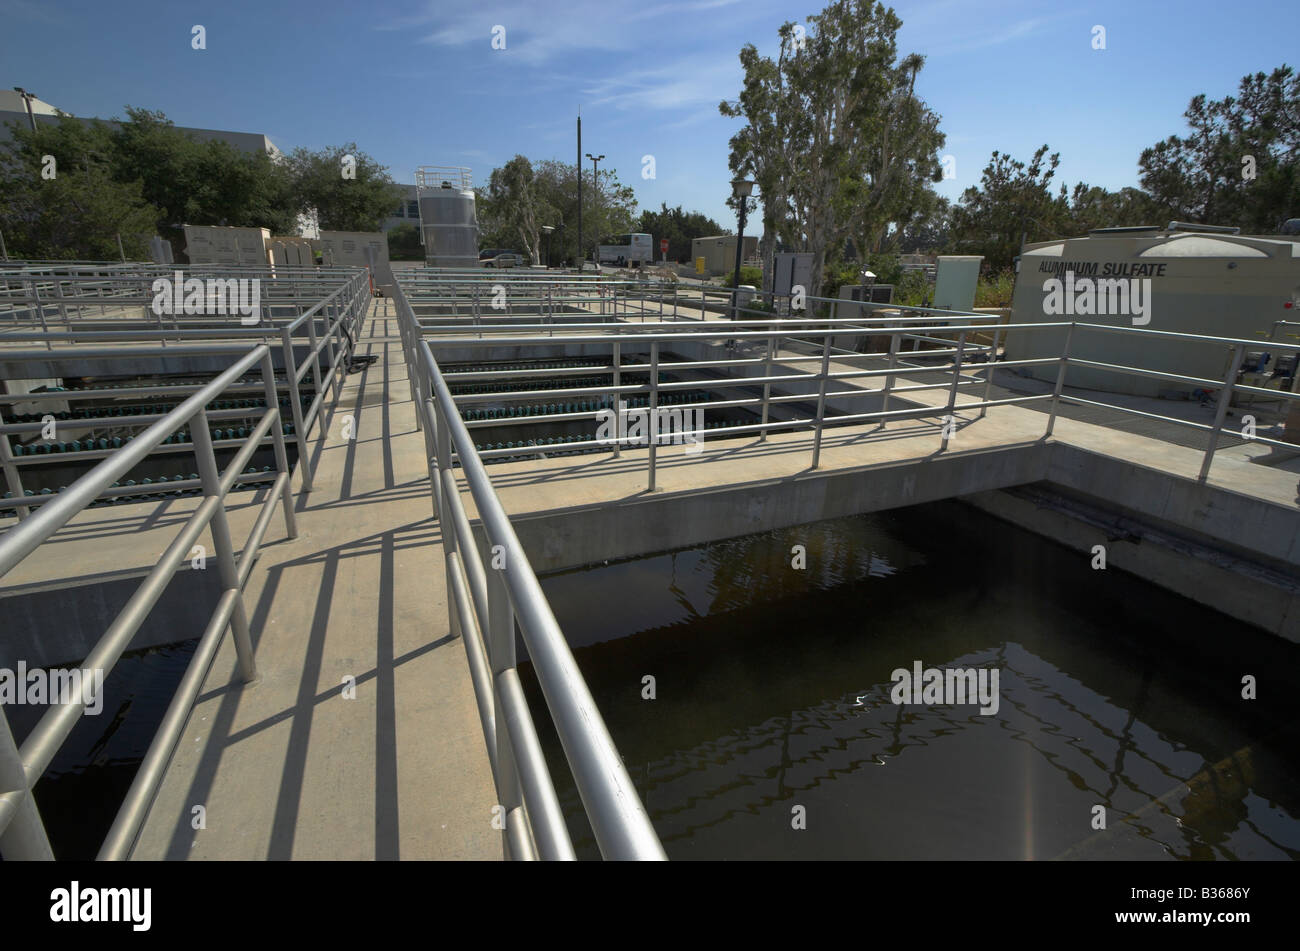 secondary-clarification-tanks-michelson-water-reclamation-plant-stock